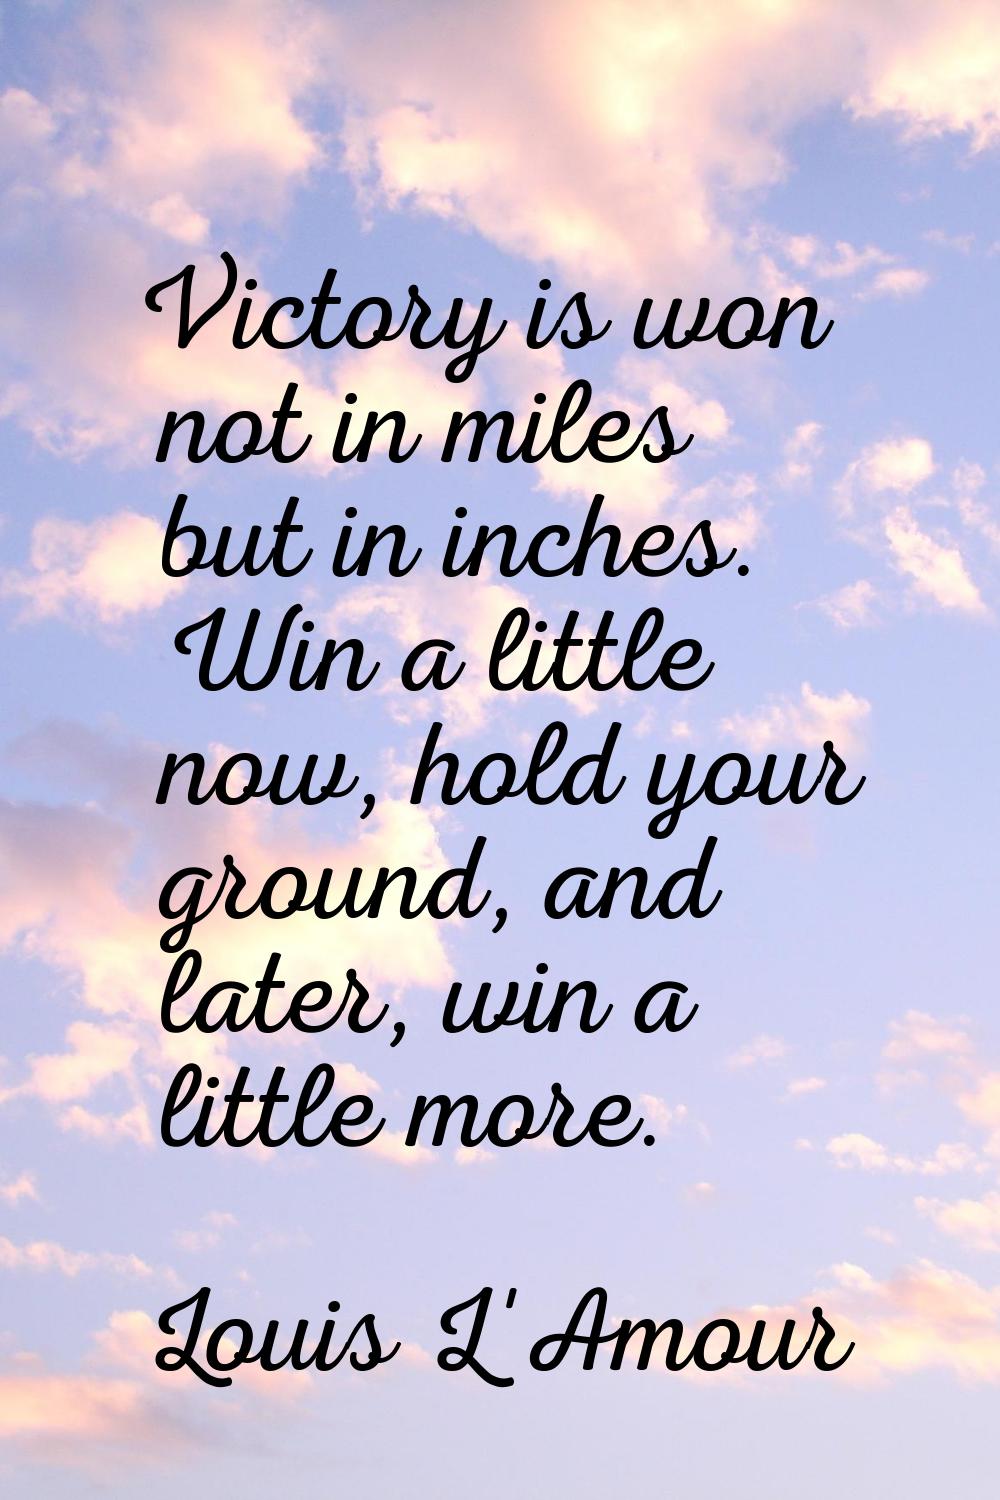 Victory is won not in miles but in inches. Win a little now, hold your ground, and later, win a lit